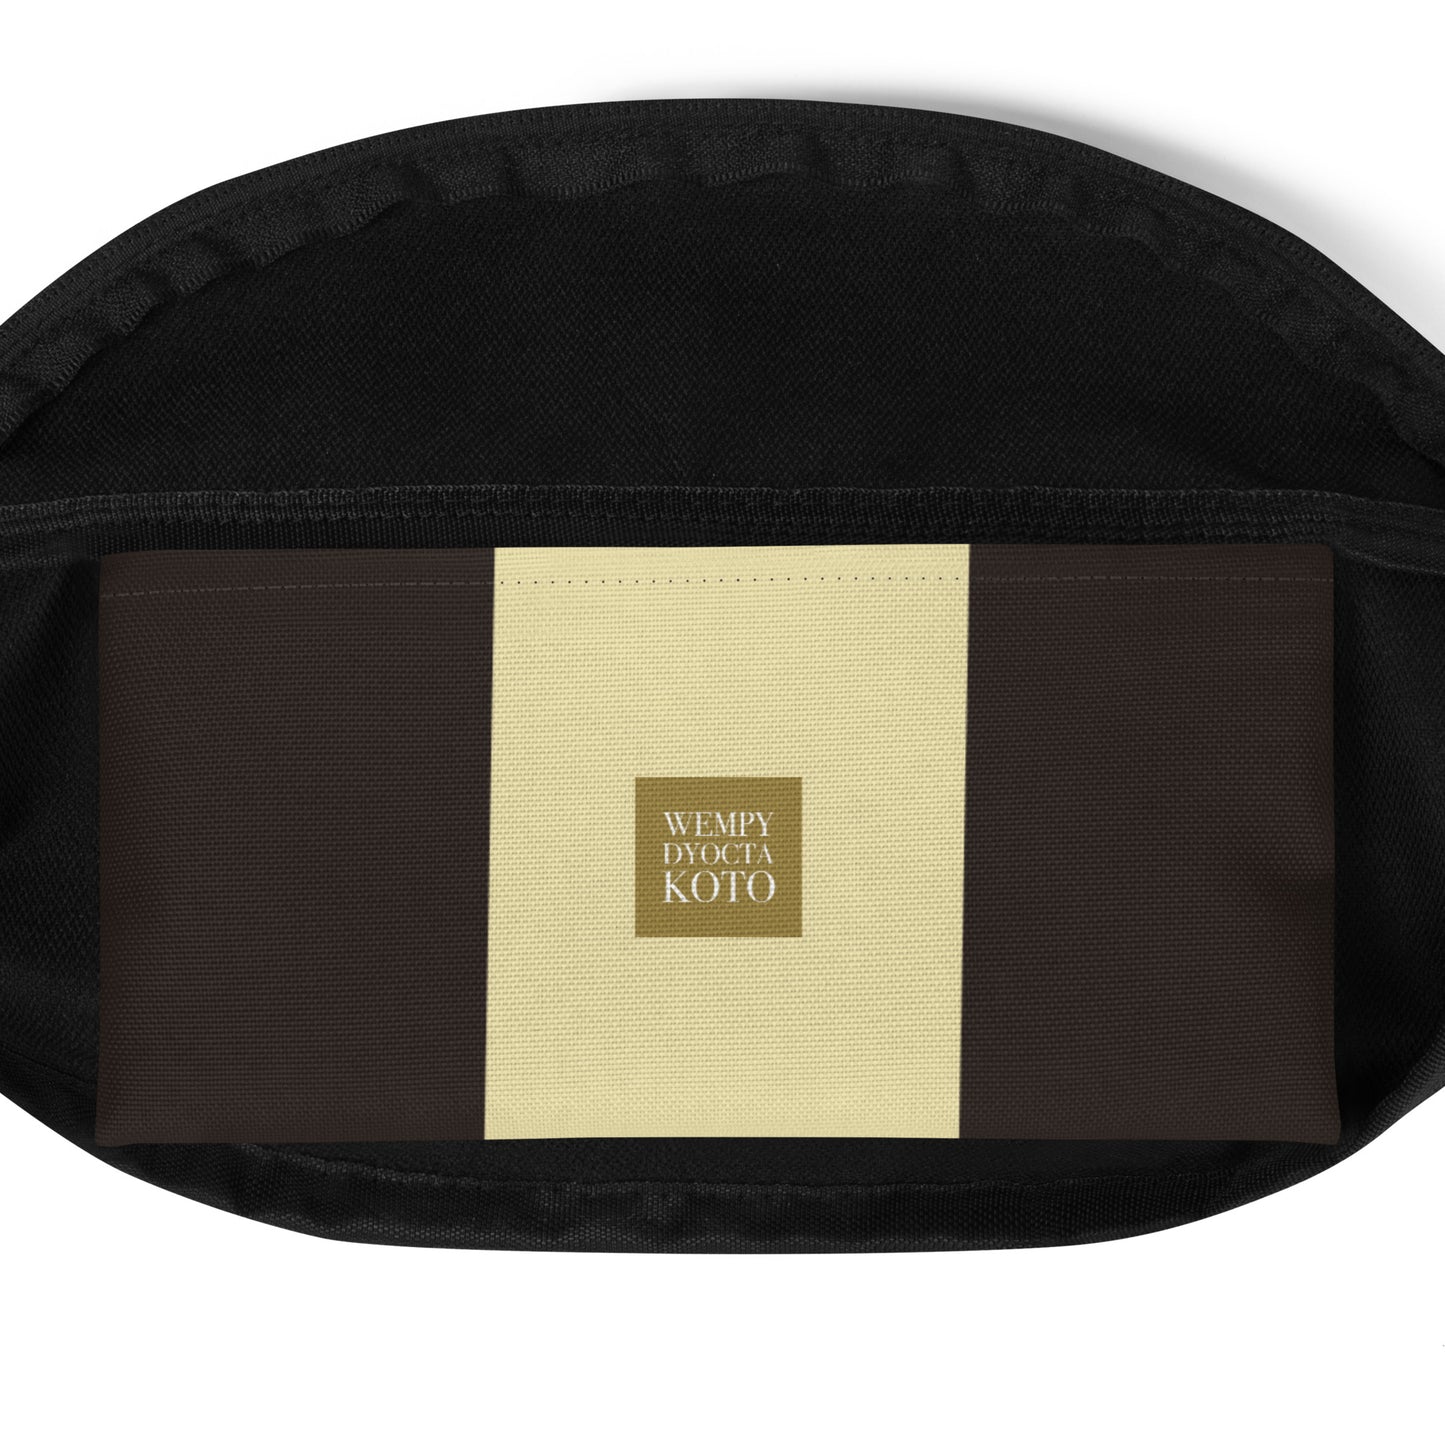 Black Gold - Inspired By Taylor Swift - Sustainably Made Fanny Pack